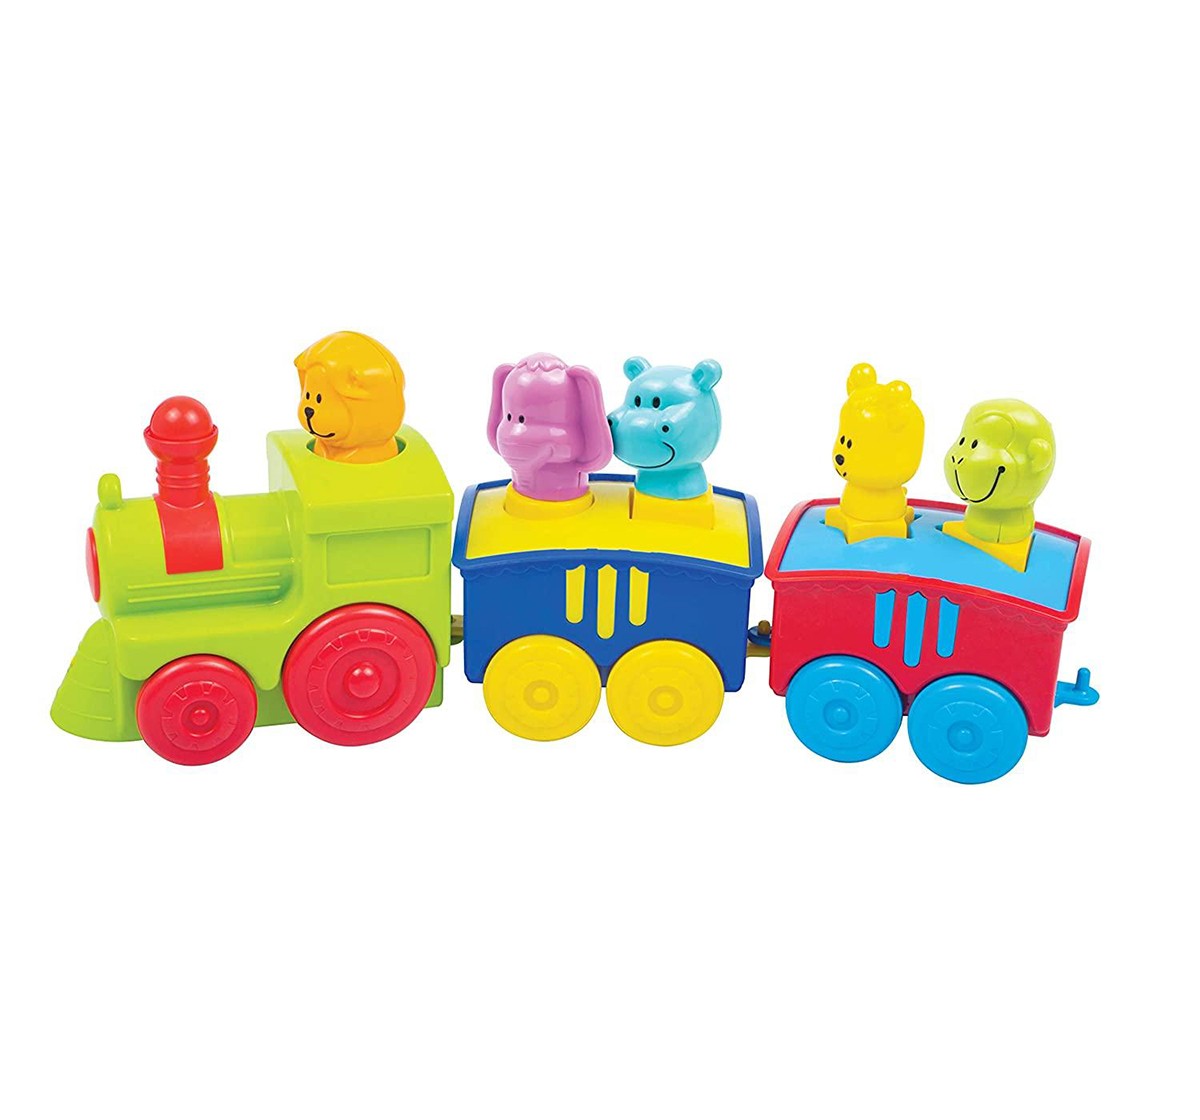  Giggles Toy Train  Early Learner Toys for Kids age 3Y+ 